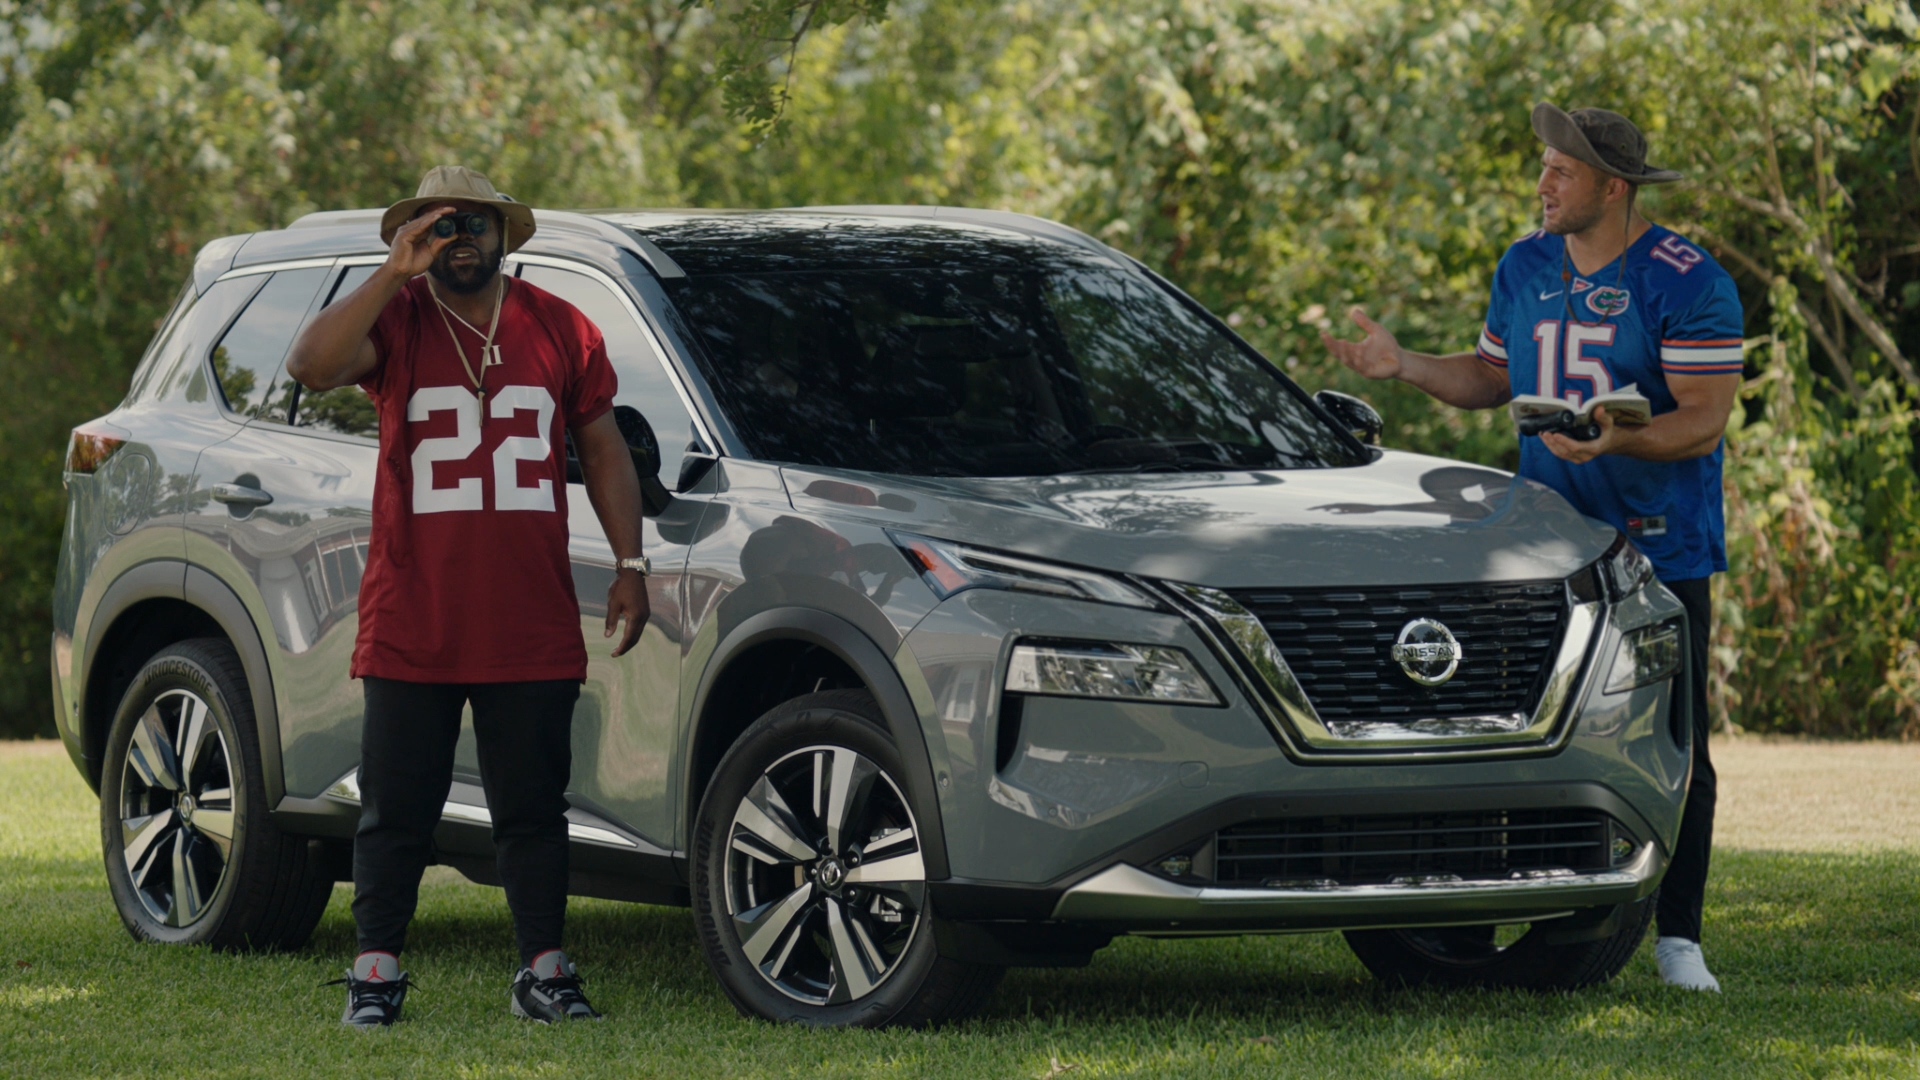 Nissan reworks playbook for 2020 college football marketing campaign